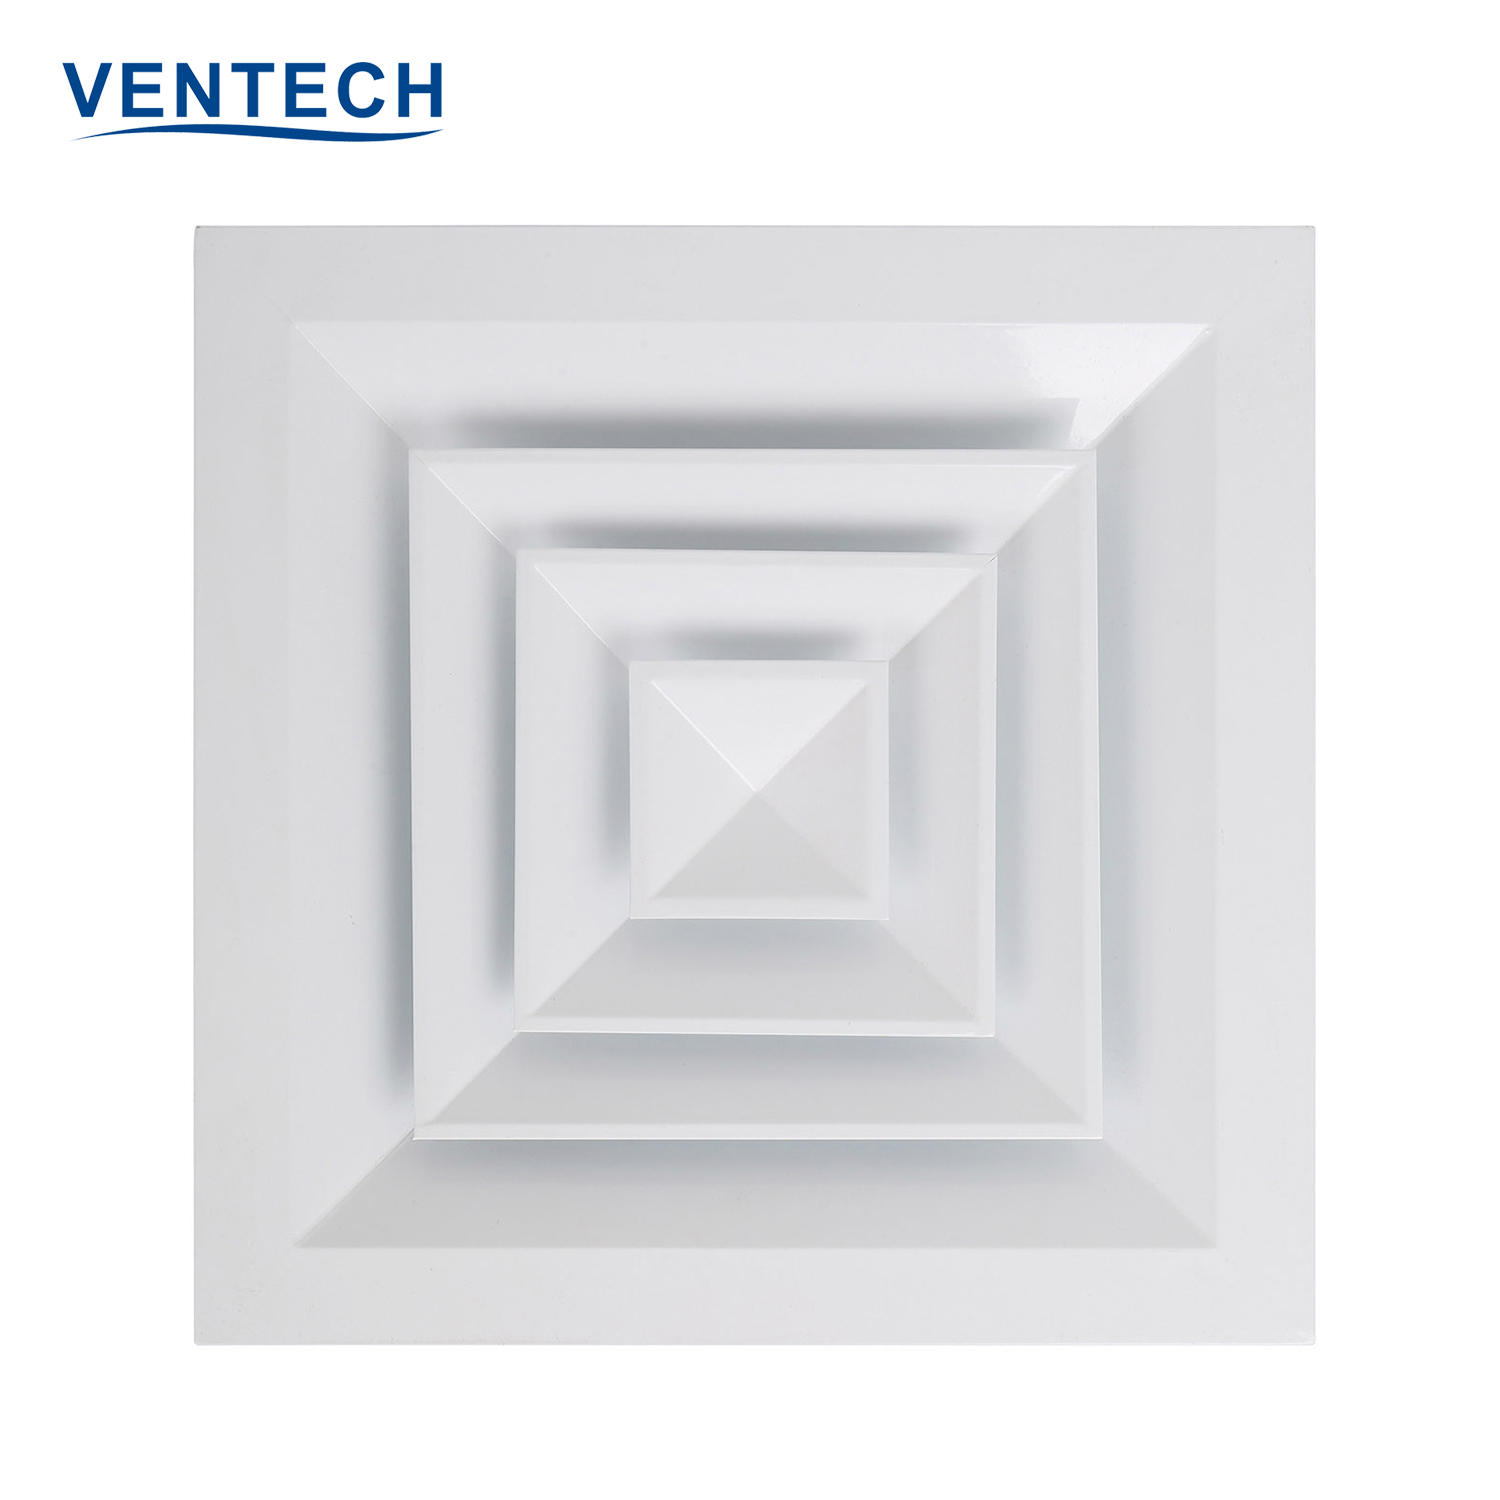 Hvac System VENTECH Exhaust Air Duct Ventilation Conditioning Aluminum 4way Square Ceiling Diffuser